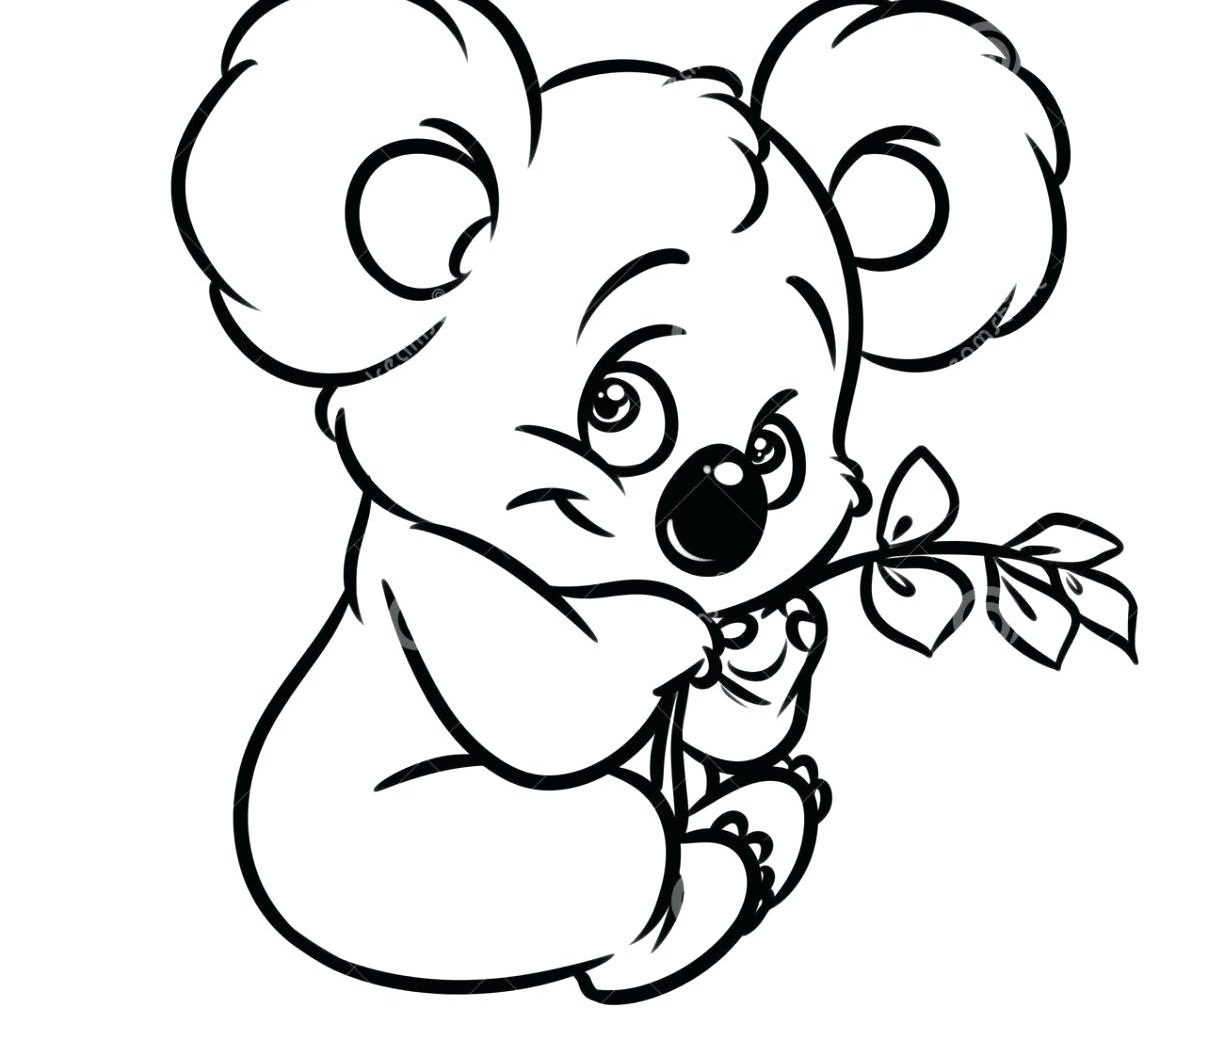 Cute Koala Drawing | Free download on ClipArtMag